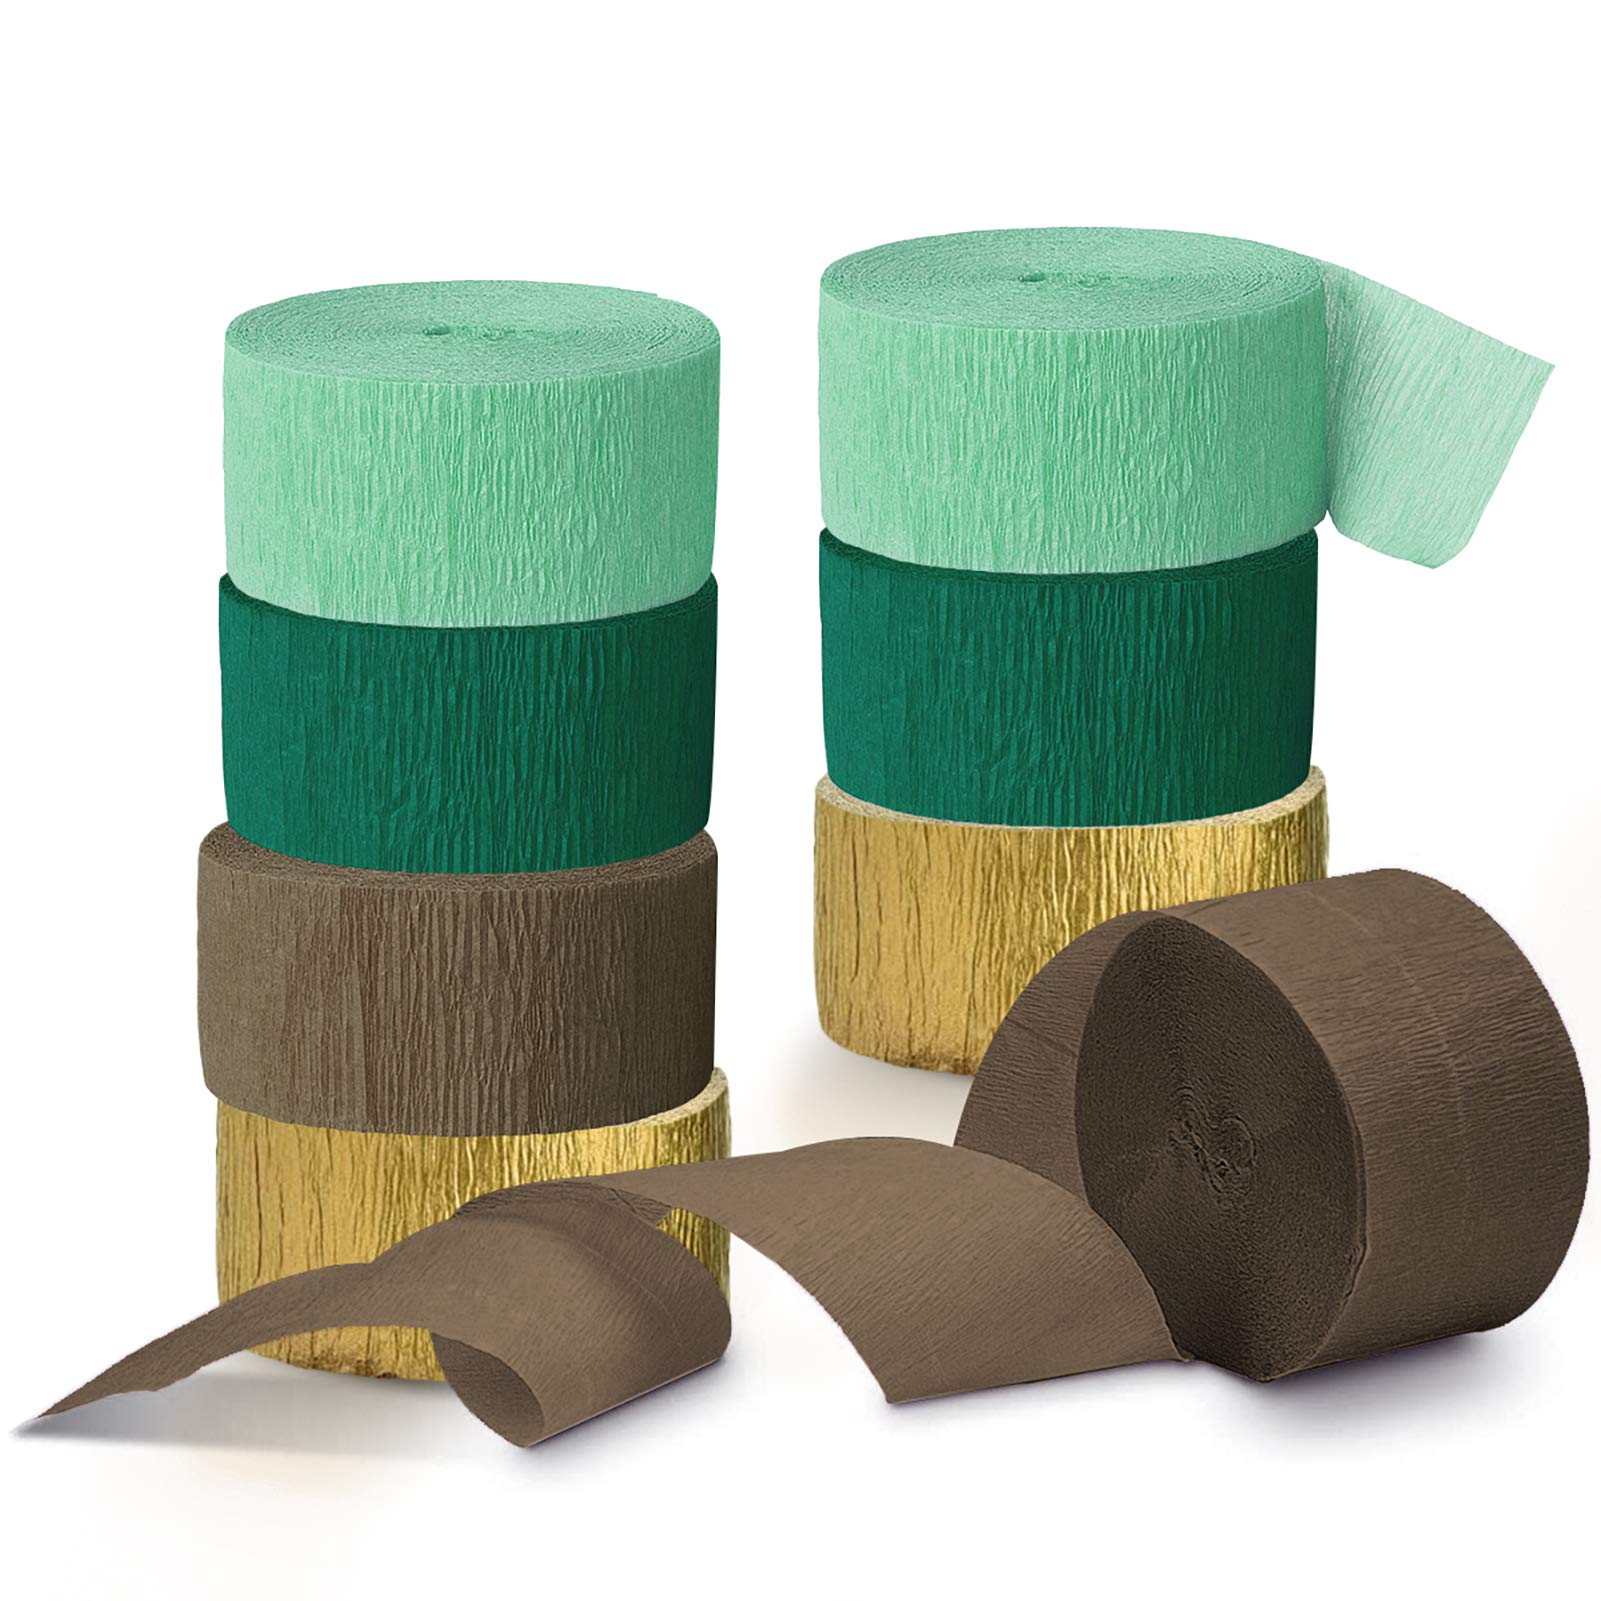 Nicrolandee NICROLANDEE Wedding Party Decorations - 8 Rolls Green Crepe  Paper Streamers Tassels Streamers for Rustic Style Bridal Shower Bir